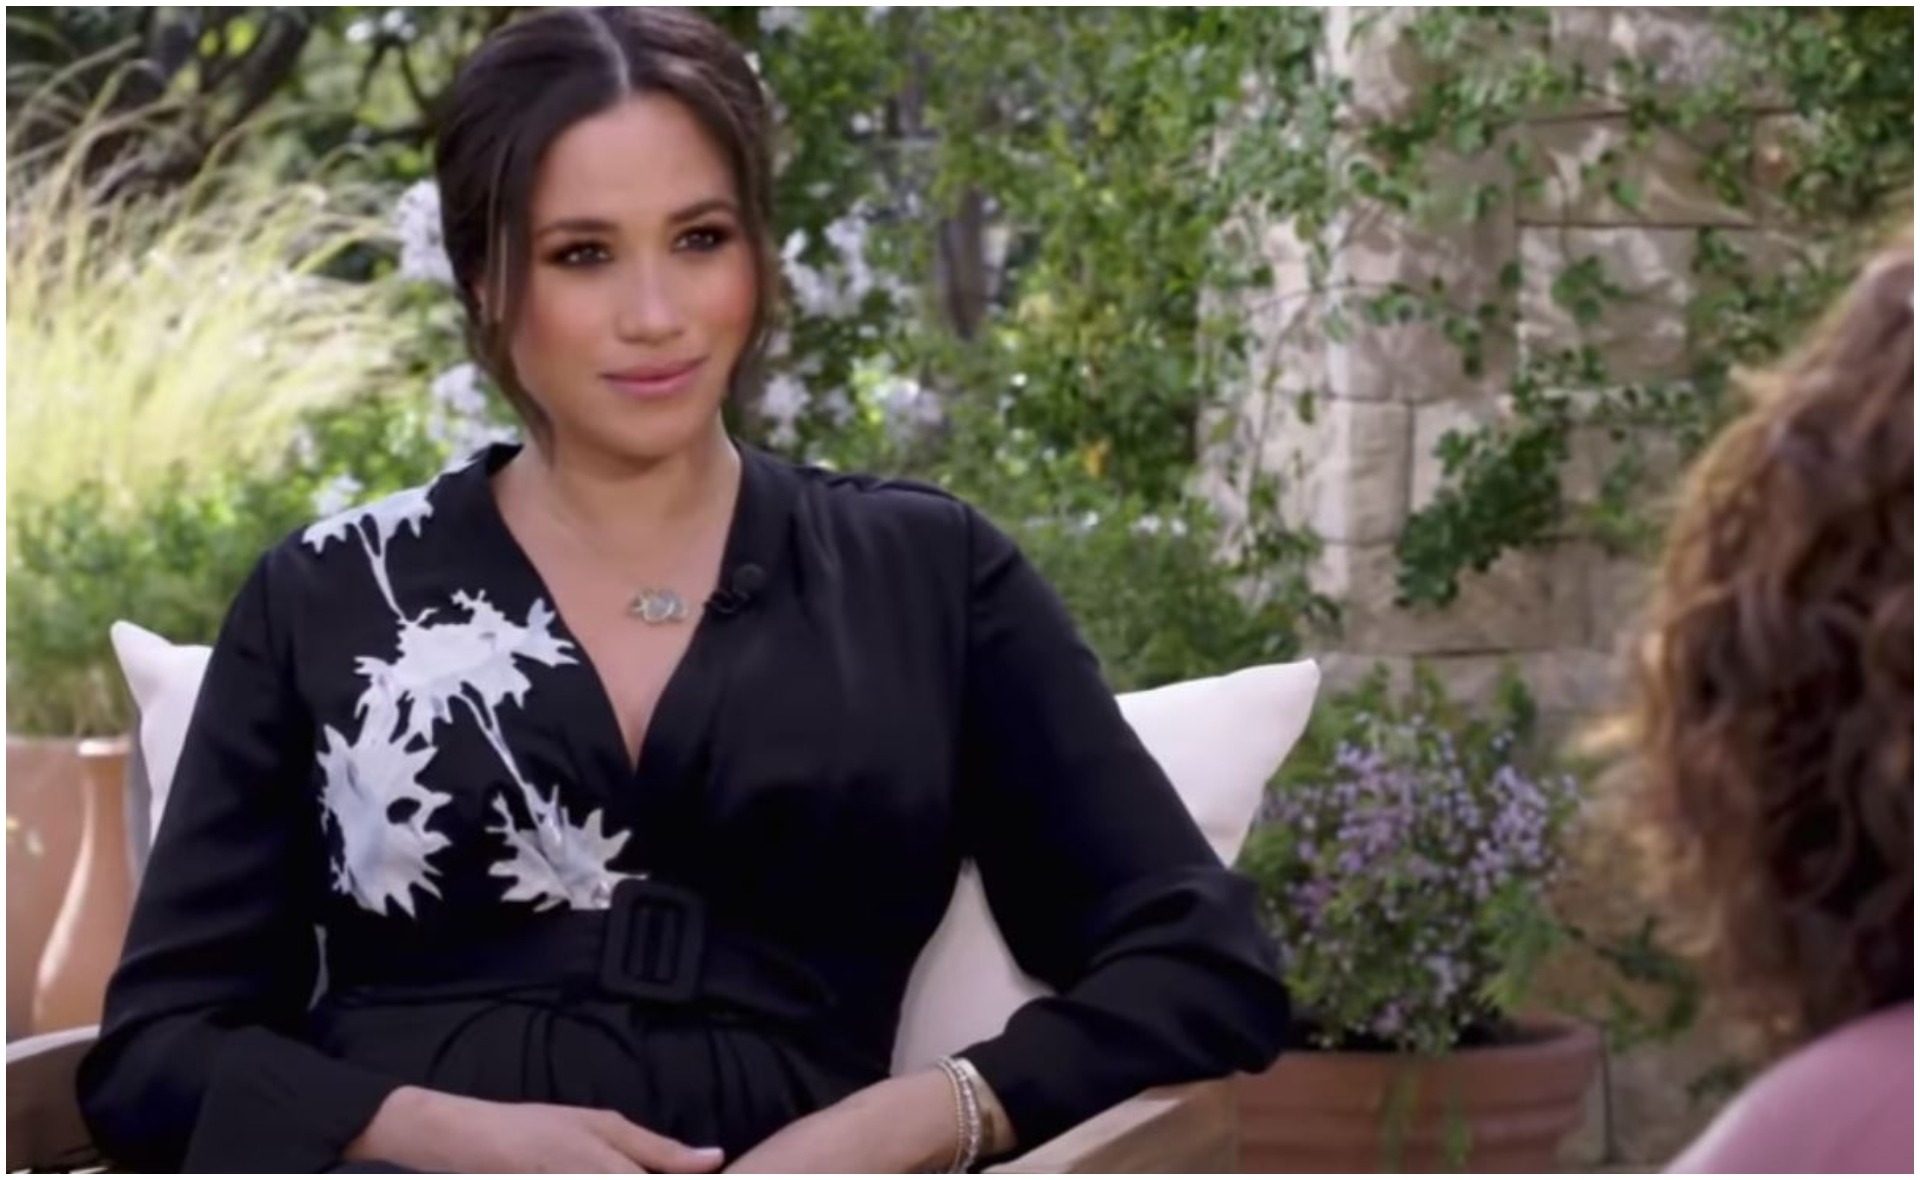 We just got another glimpse of Duchess Meghan’s maternity style in a trailer for her tell-all Oprah documentary, and it’s dripping in perfection